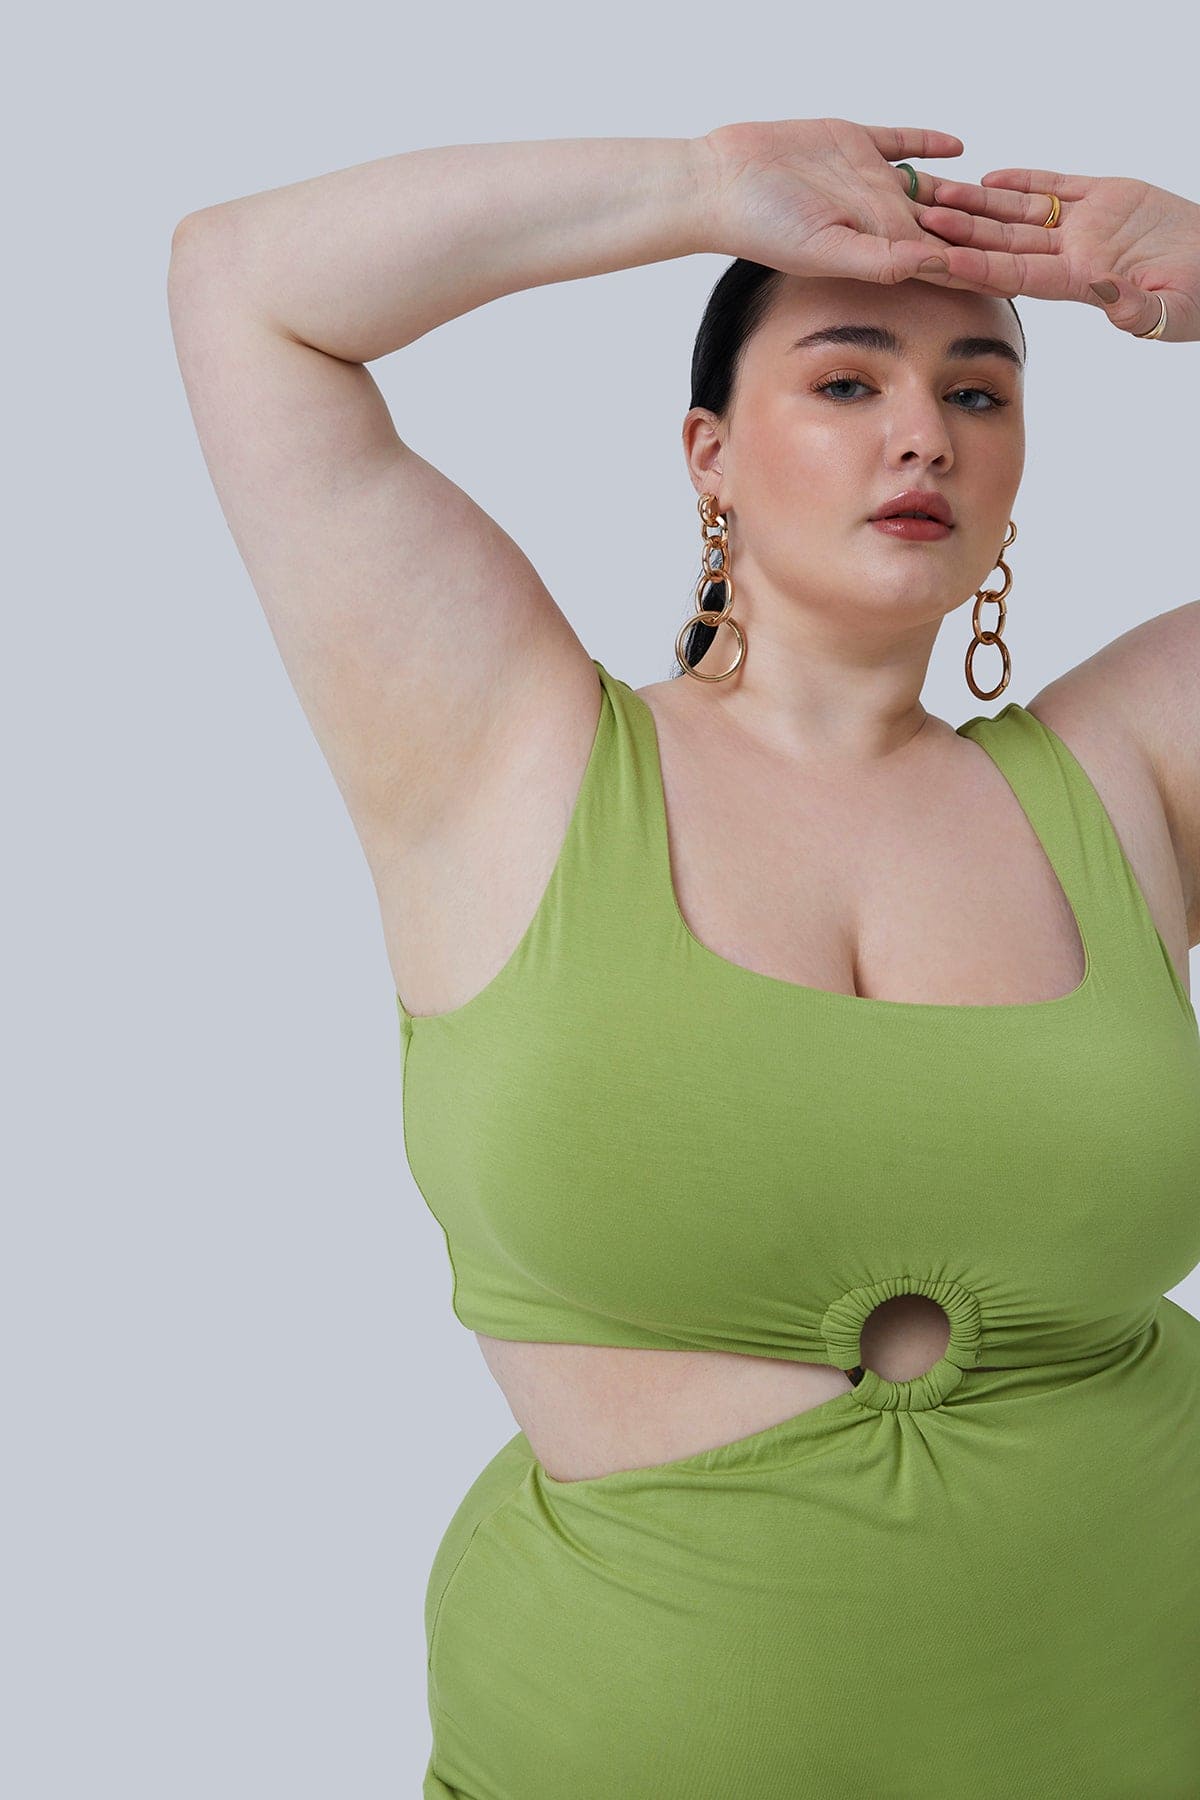 Detail shot of Gigi Midi Dress in Pistachio with the cut out sides on this plus size dress. Dress worn by plus size model with dark hair in low pony tail. Hands resting on forehead.